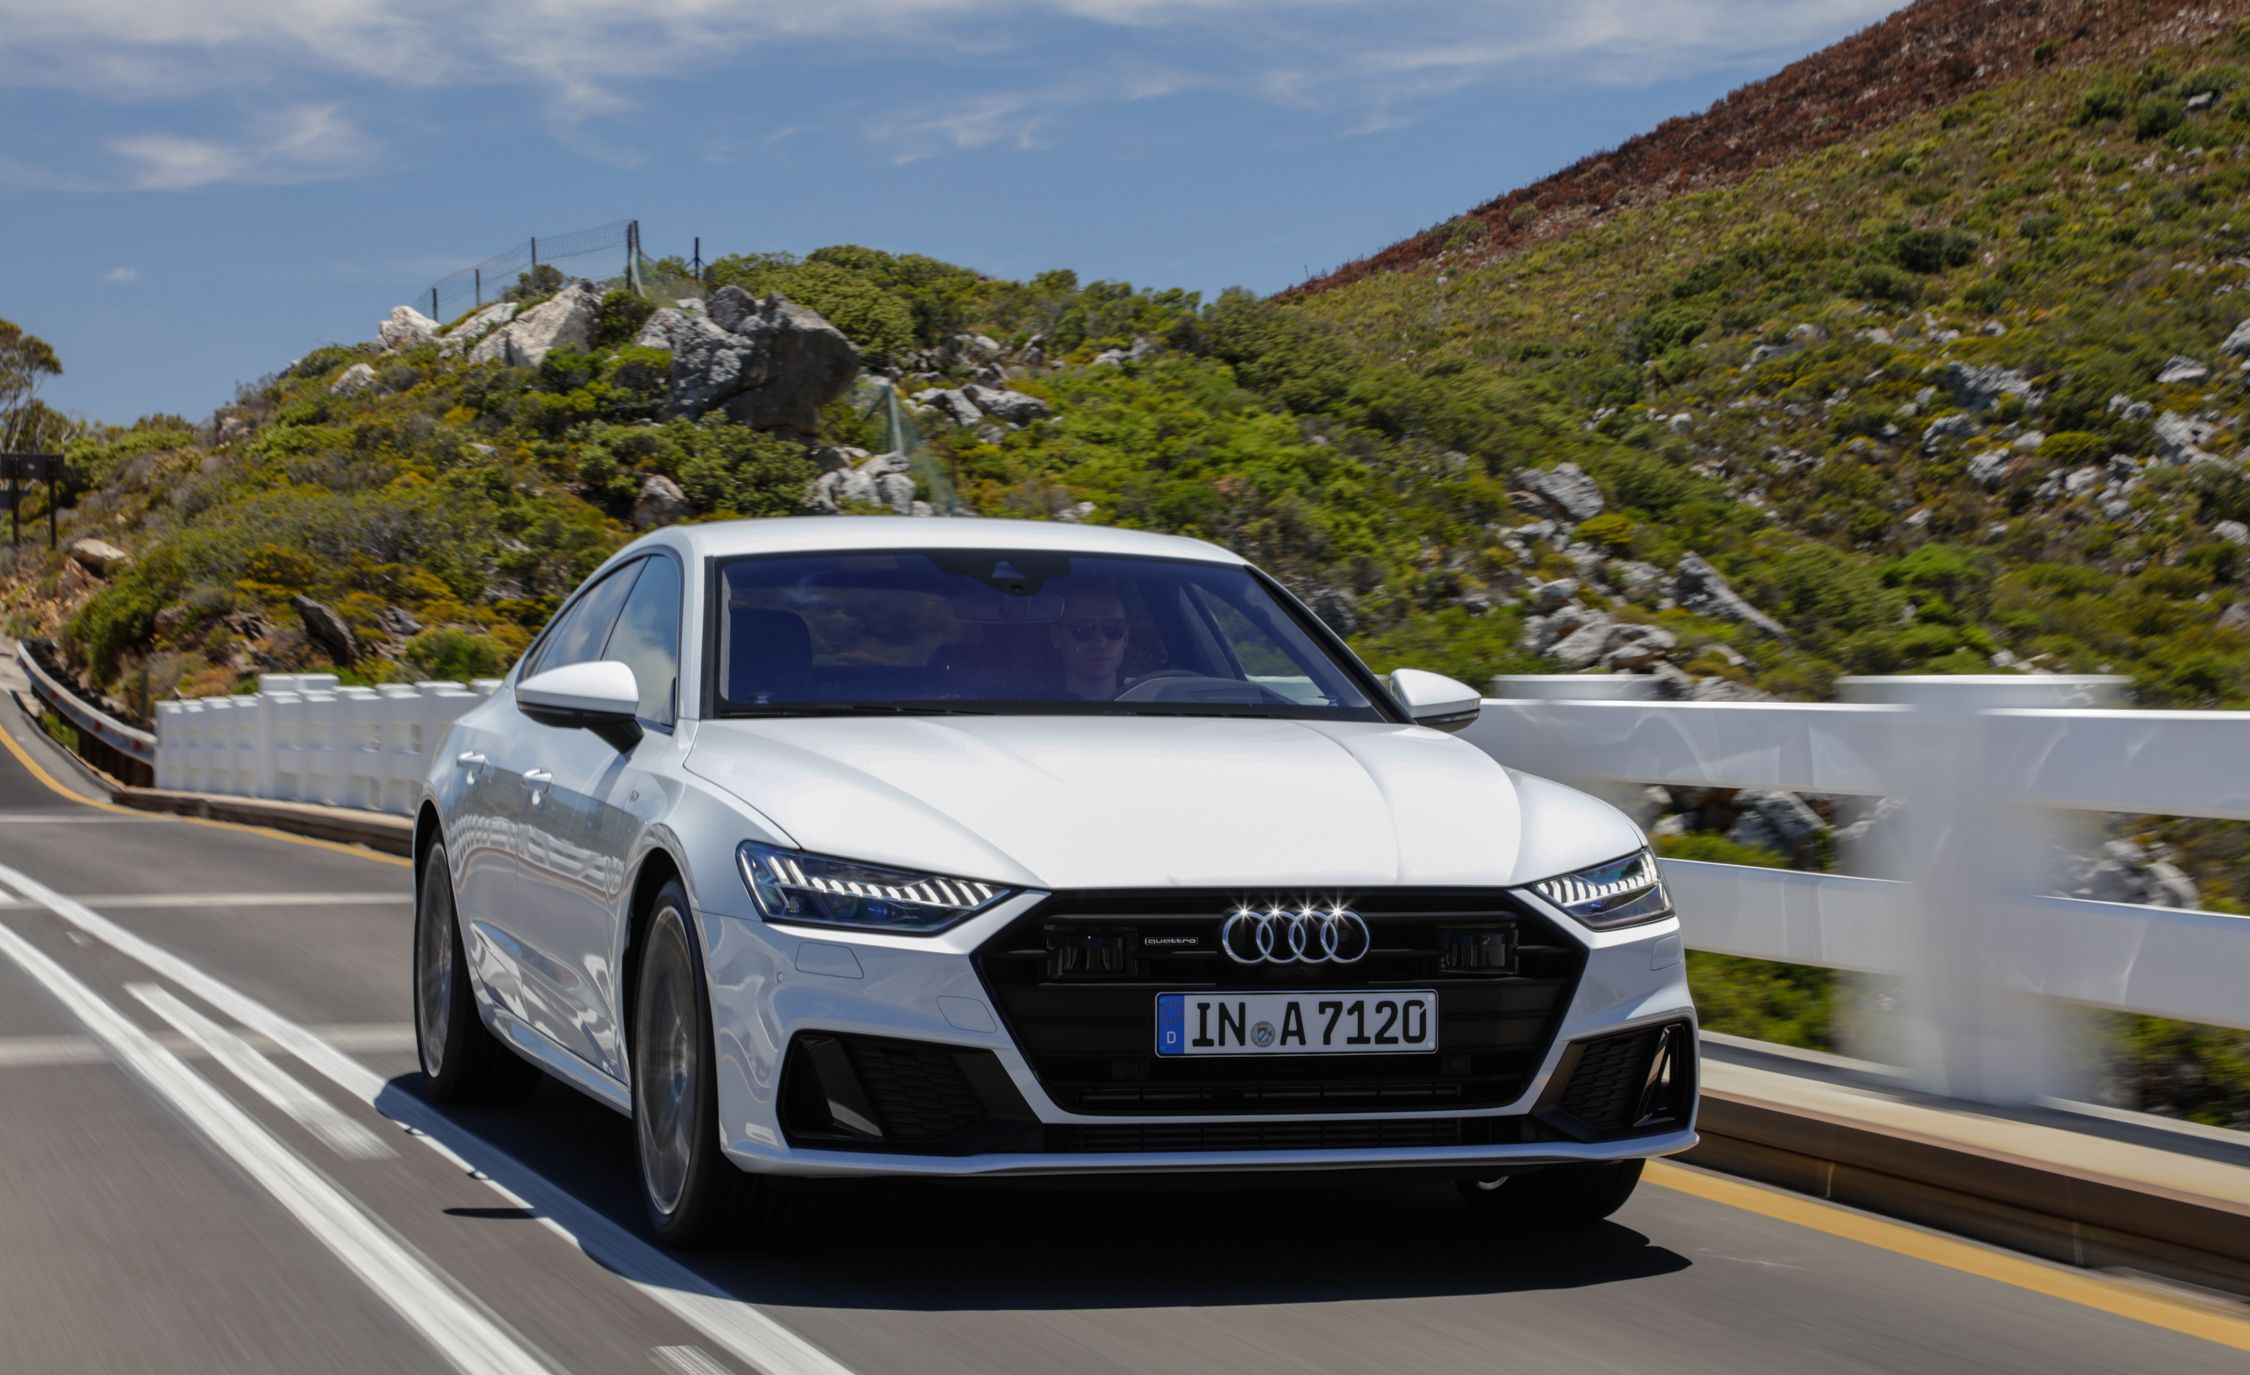 2019 Audi A7 Priced from $68,995